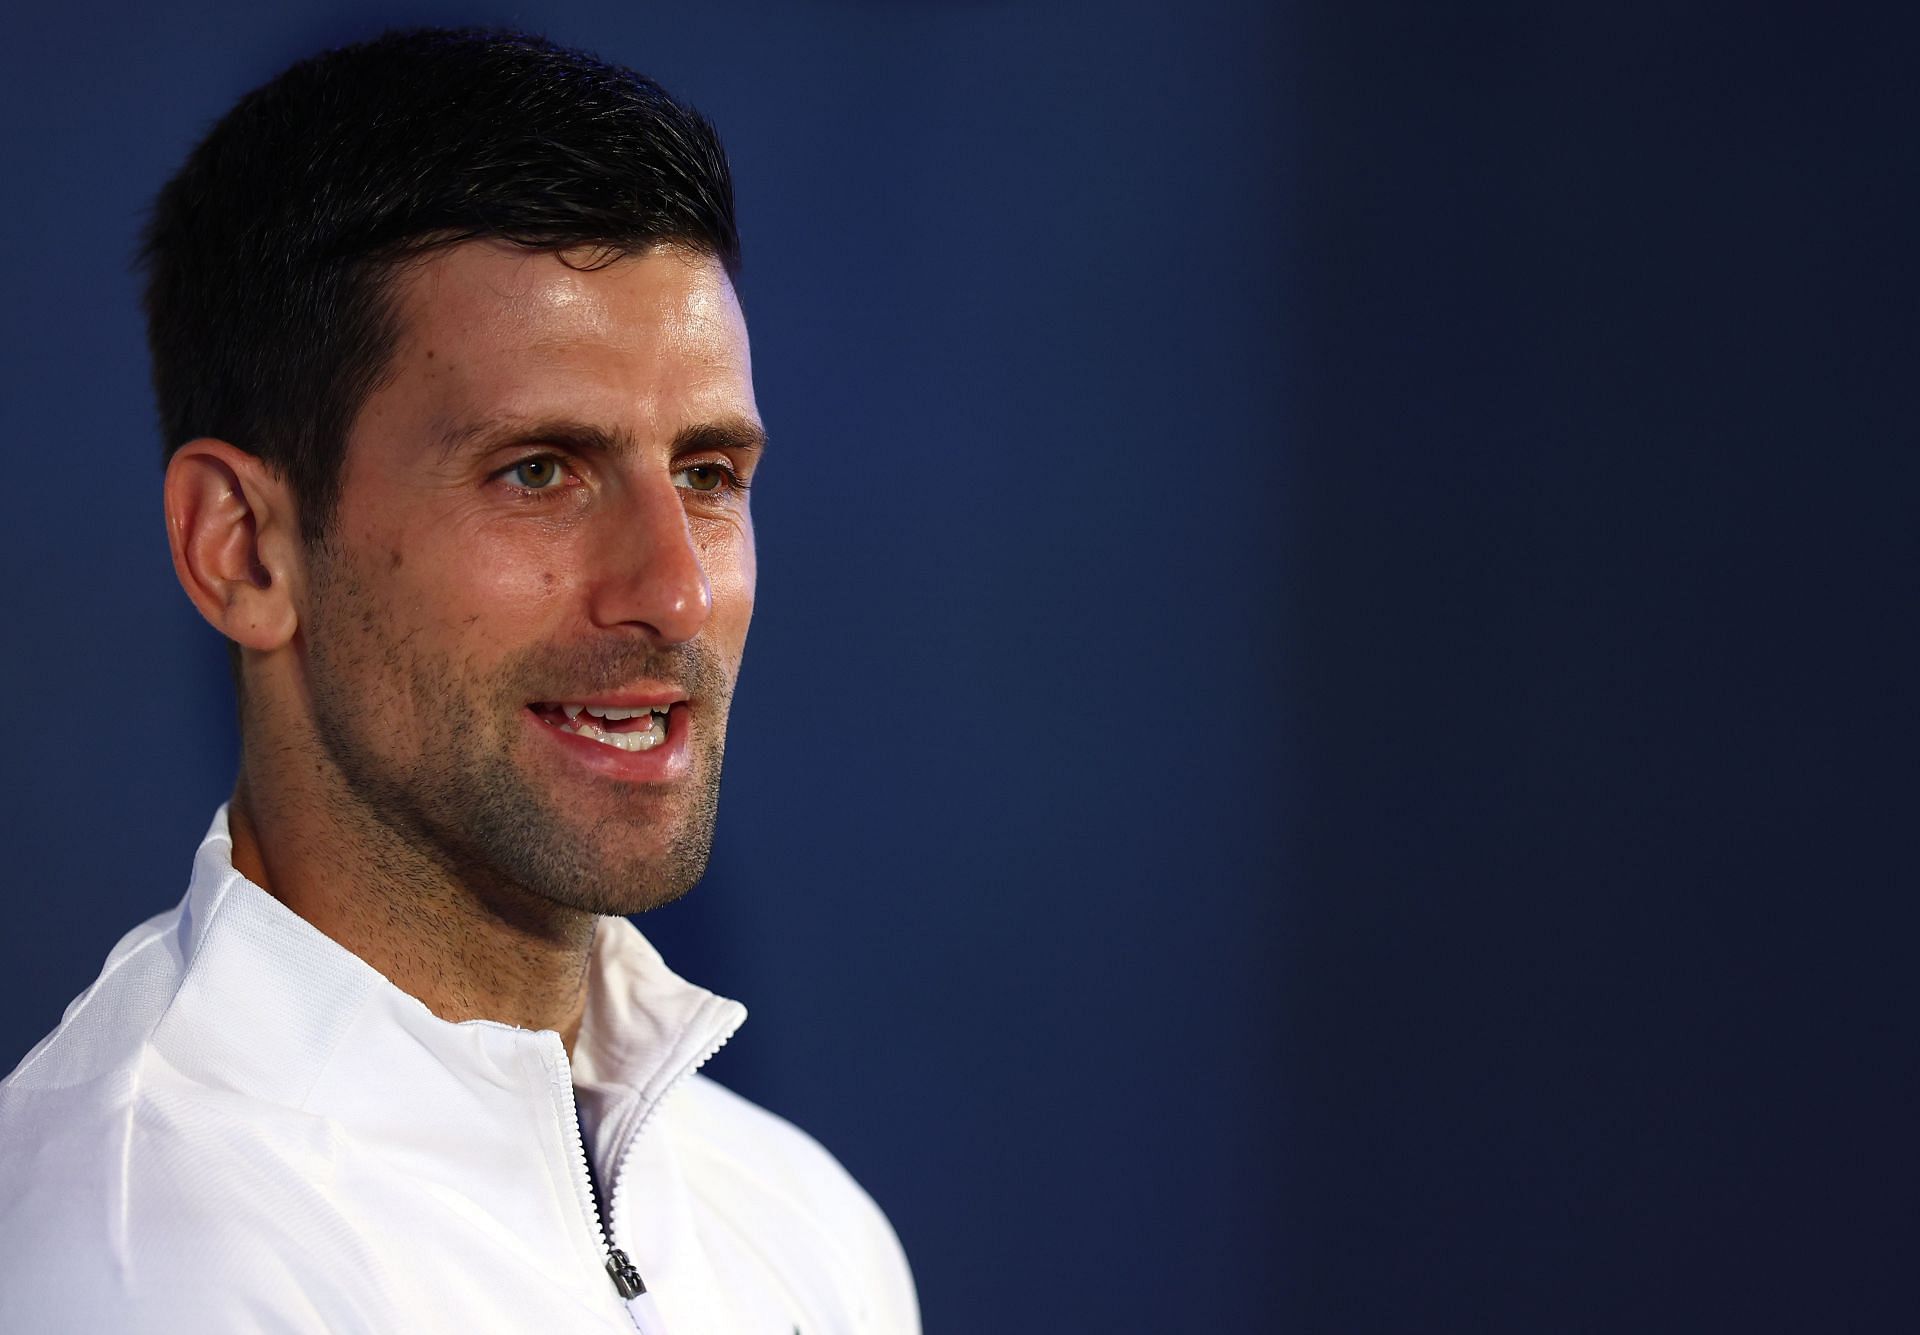 Novak Djokovic defended his note and his stance on Kosova